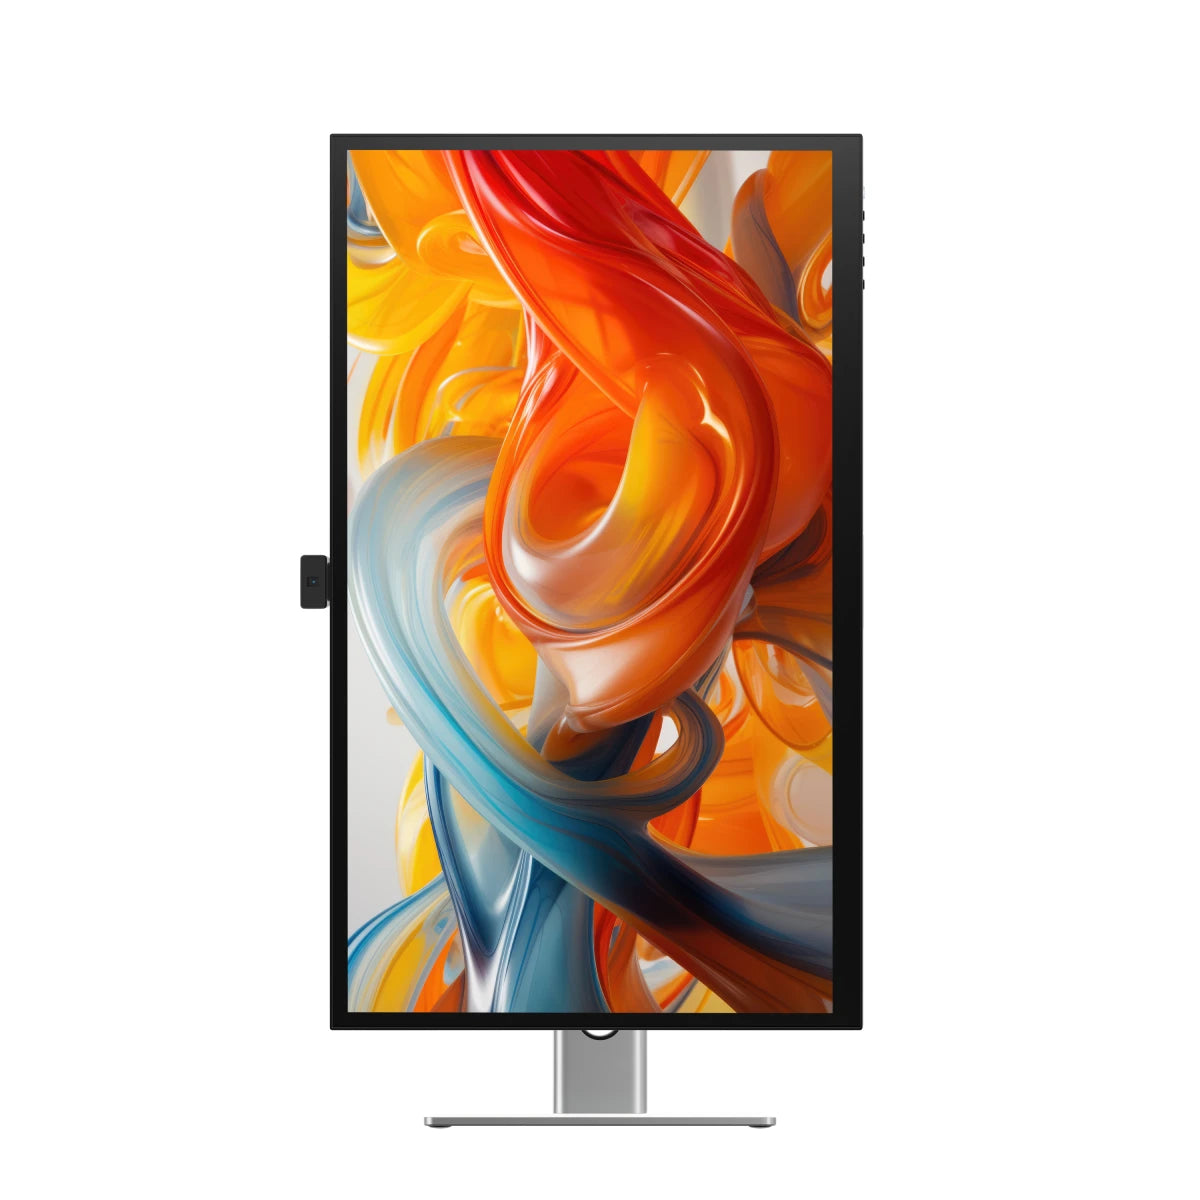 clarity-pro-touch-27-uhd-4k-monitor-with-65w-pd-webcam-and-touchscreen_3